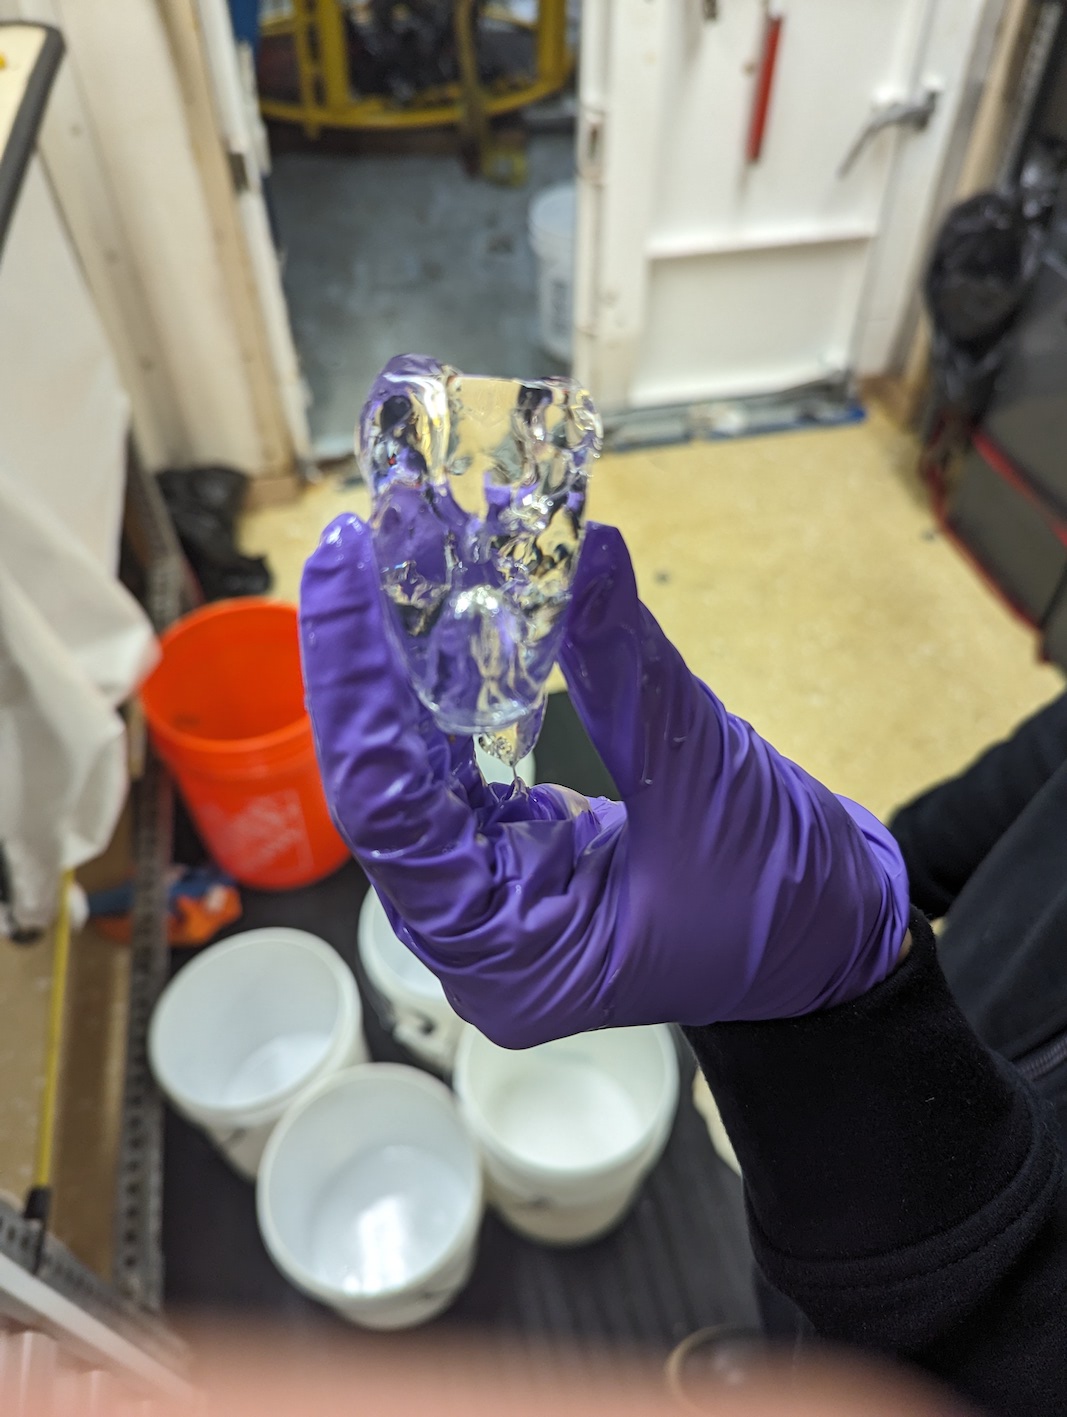 posterior nectophore bell of a siphonophore, held by hand in purple gloves